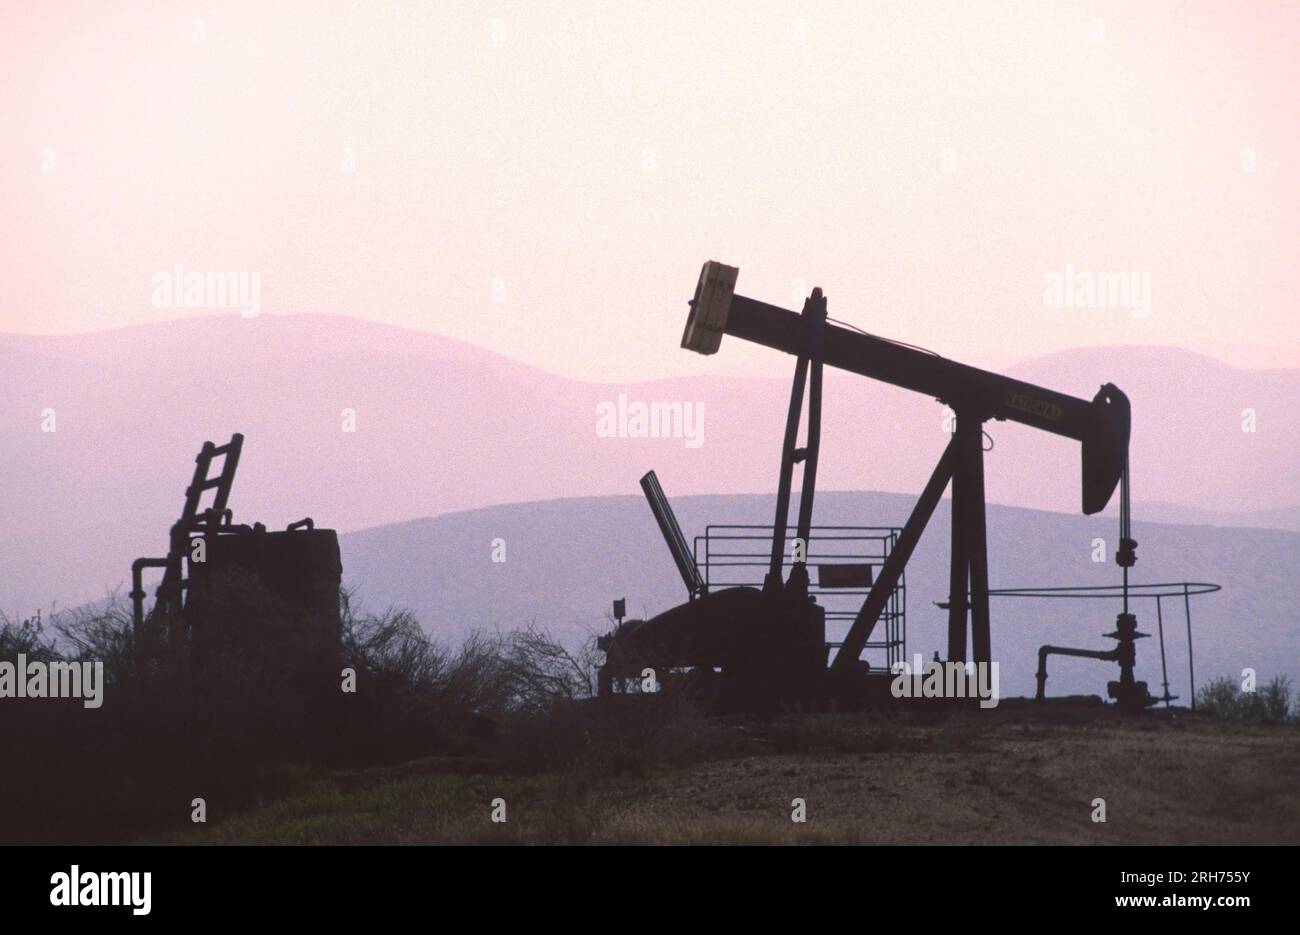 The change in oil prices caused by the war. Oil price cap concept. Oil drilling derricks at desert oilfield. Crude oil production from the ground. Pet Stock Photo